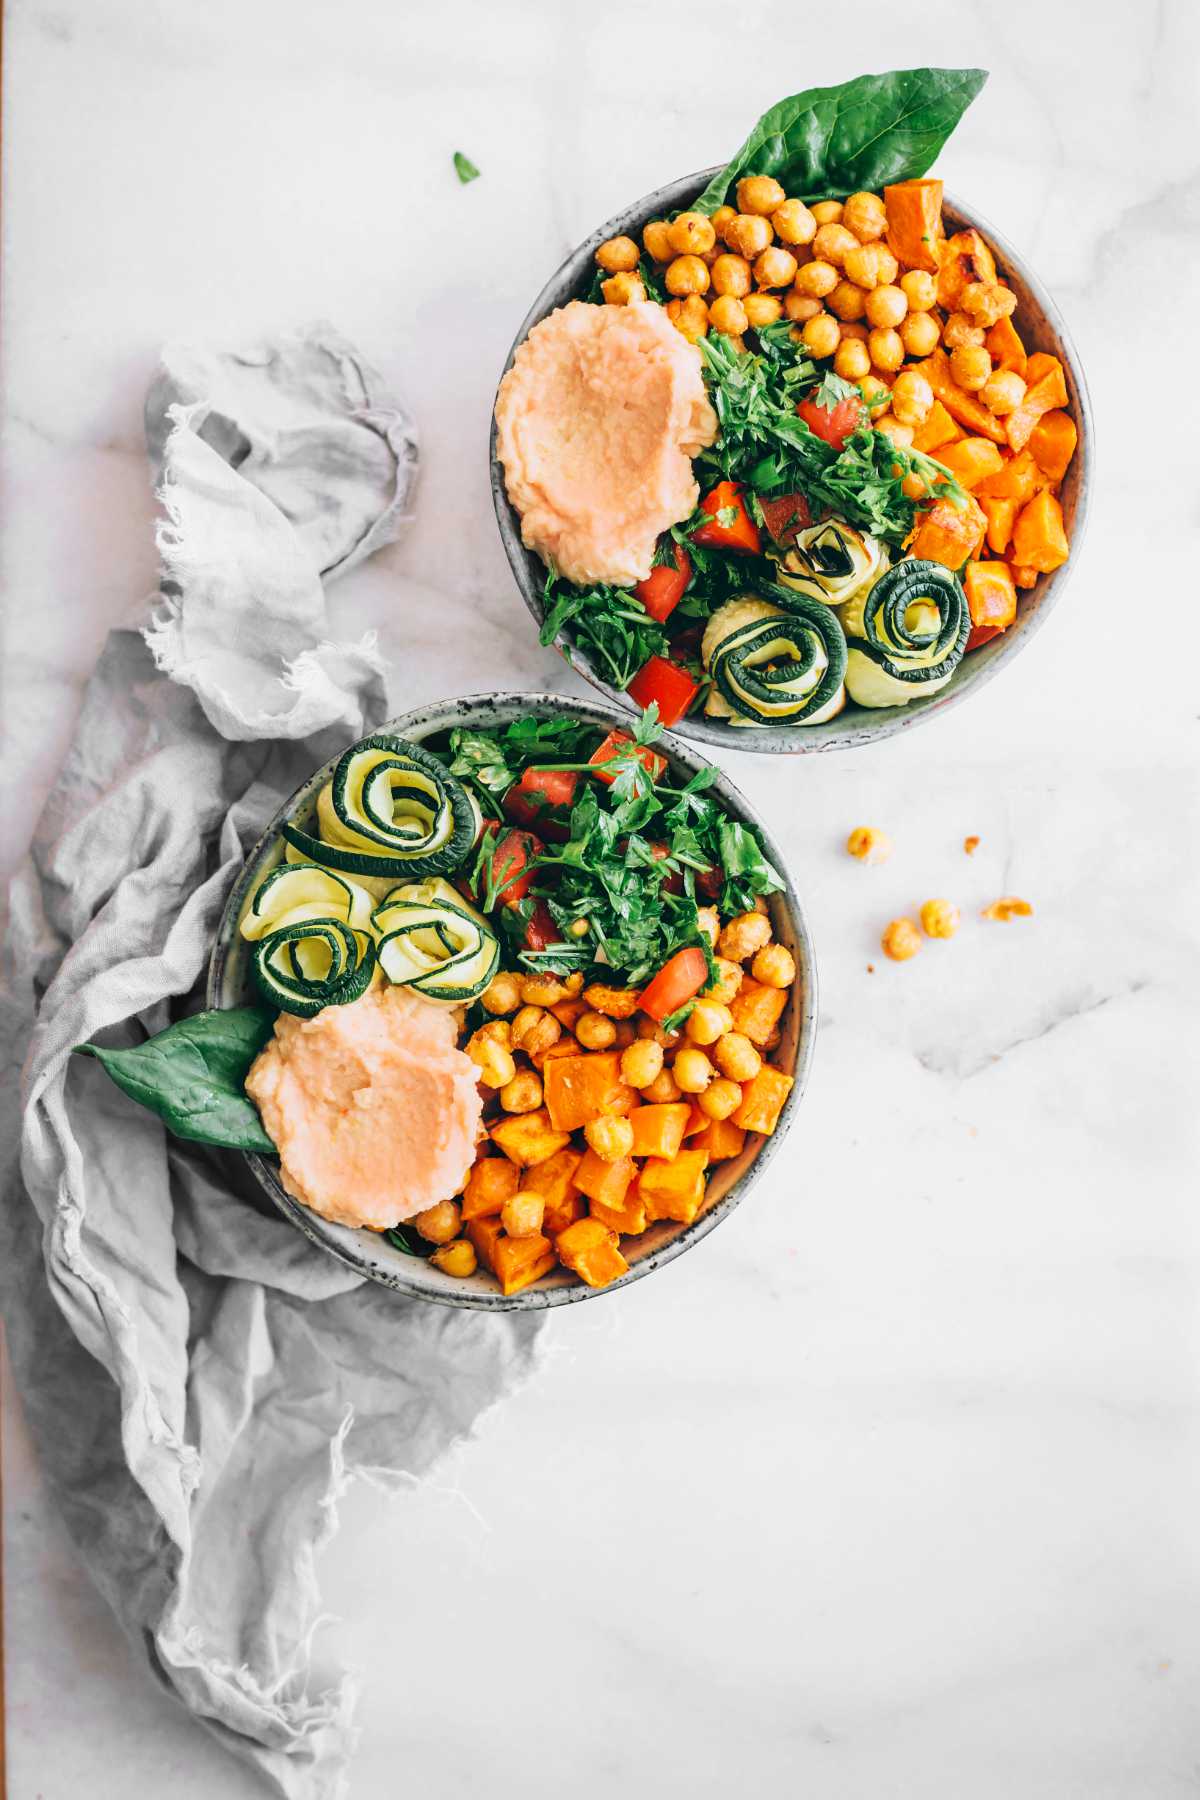 two bowls with chickpeas, salad, zucchini, hummus and sweet potatoes